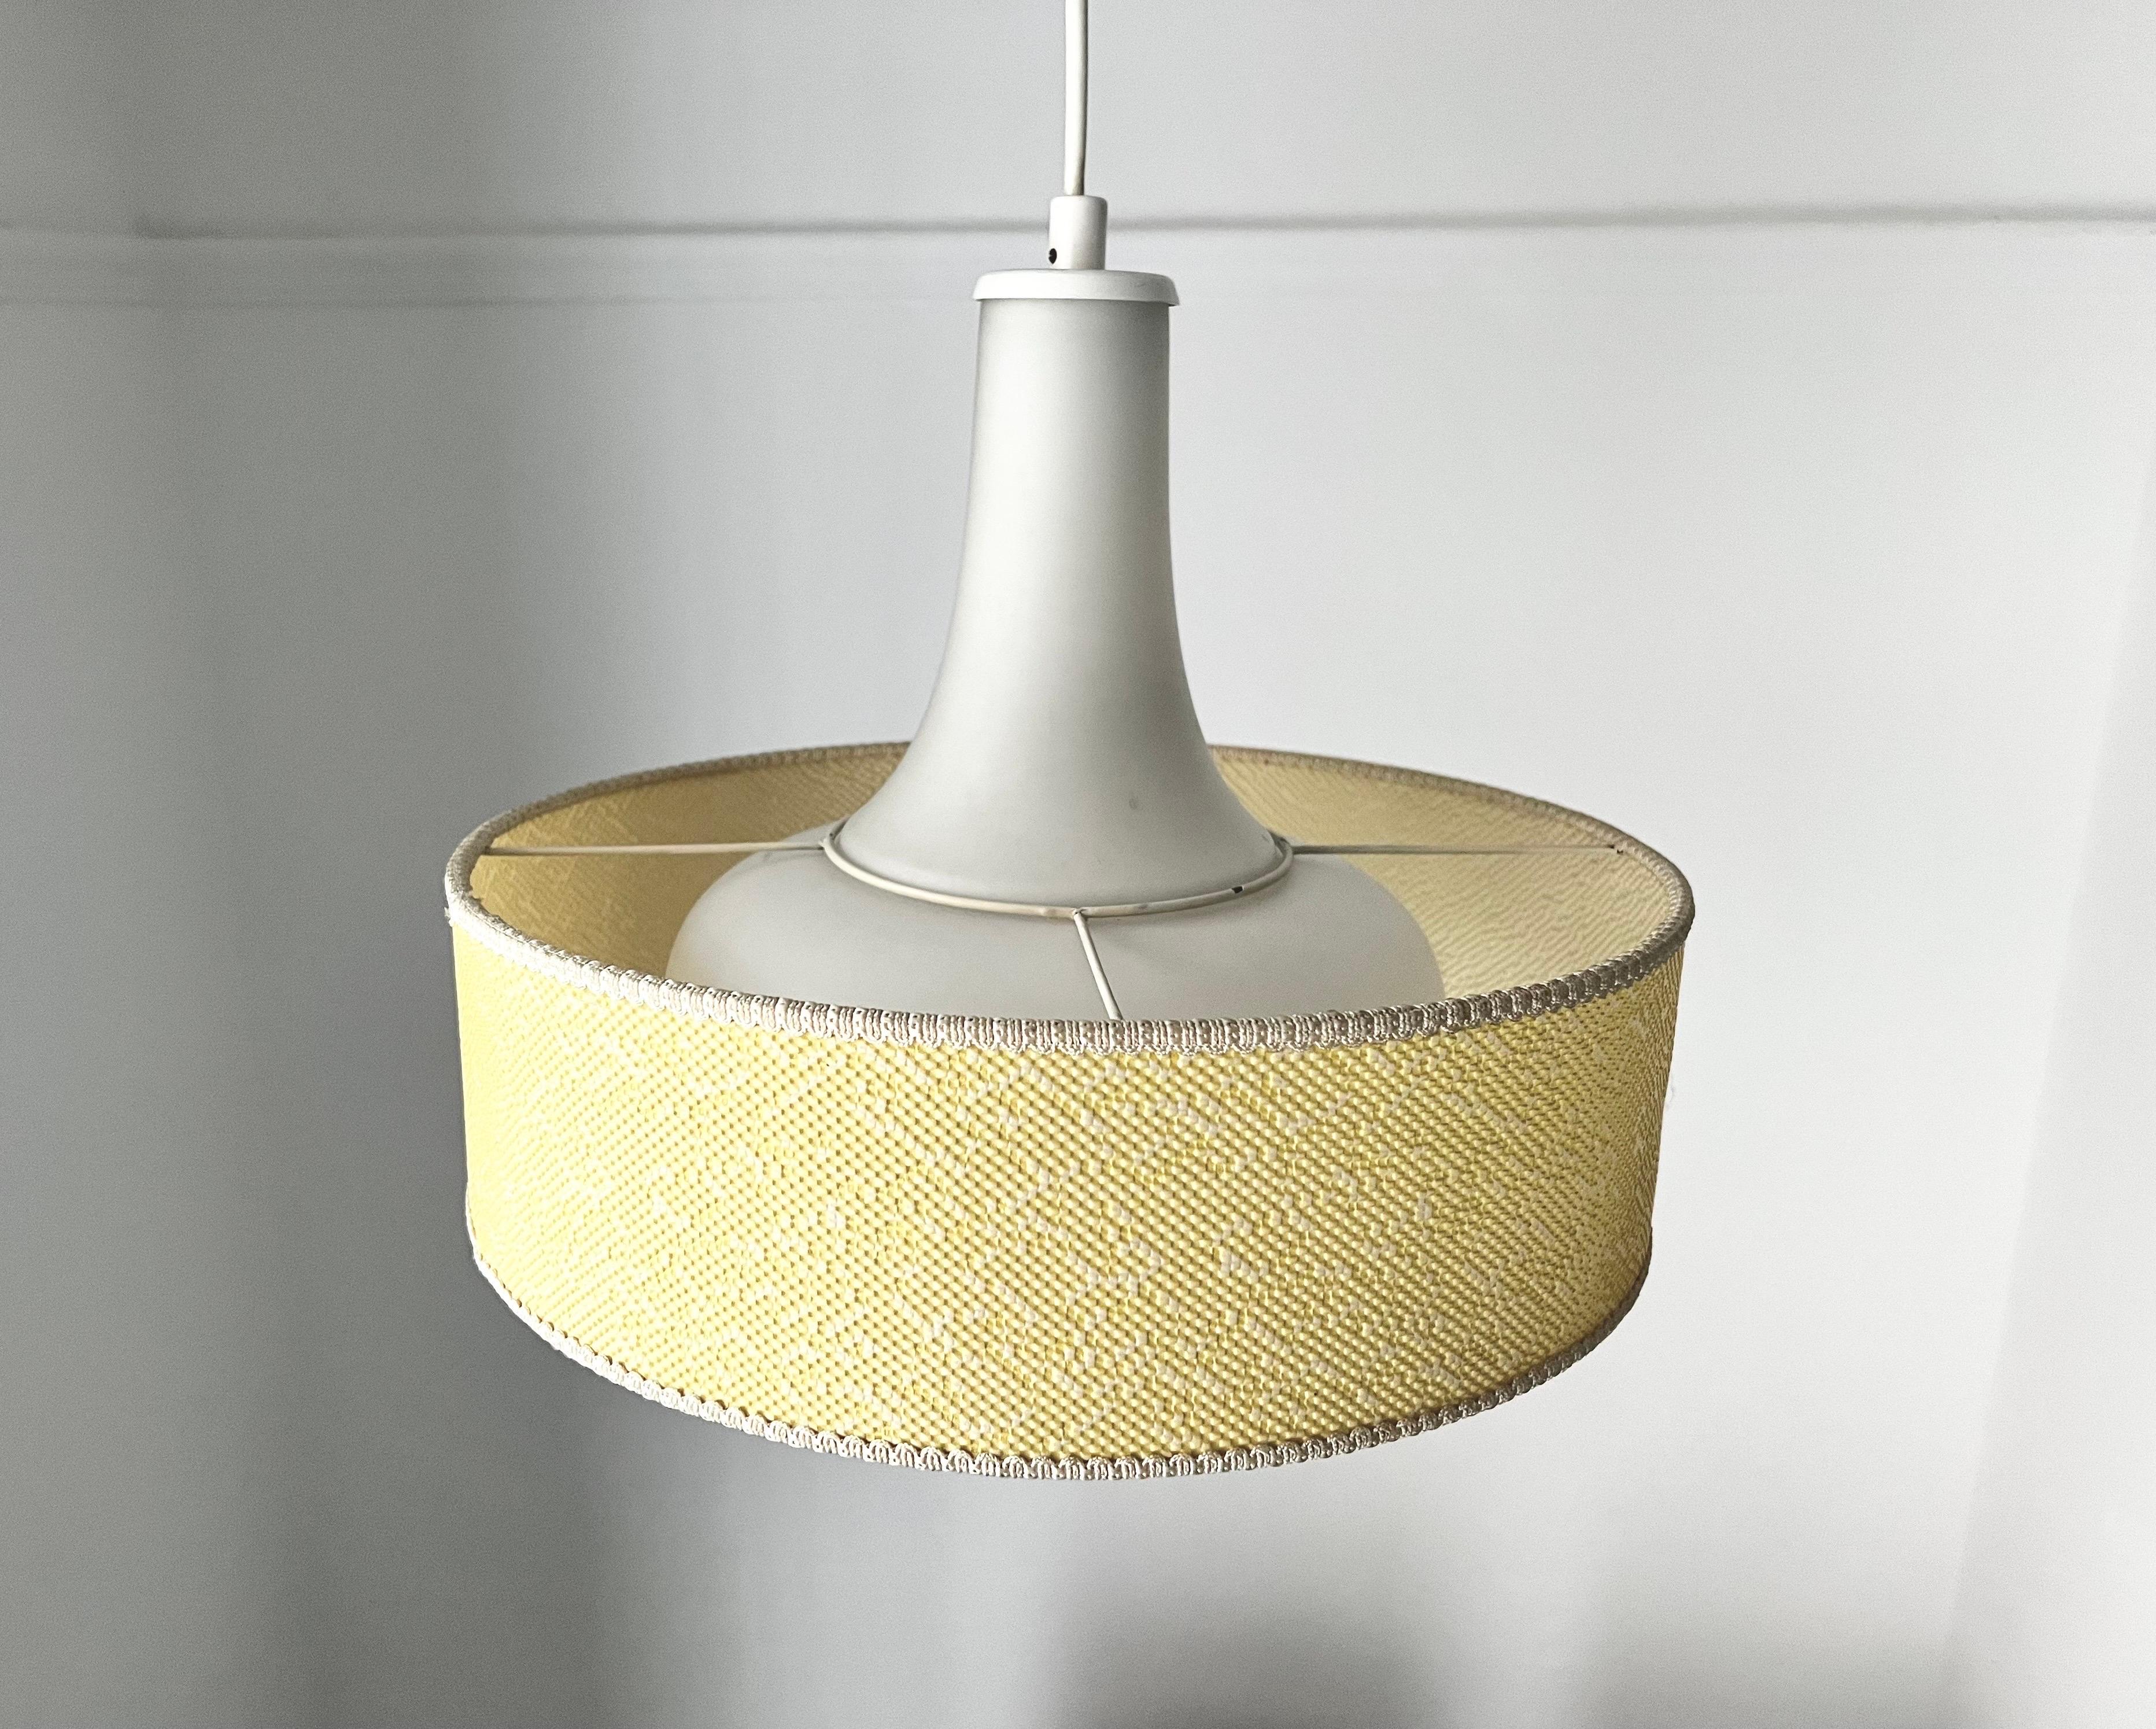 20th Century Mid-Century Glass Pendant Light with Optional Yellow Shade by Itsu of Finland For Sale